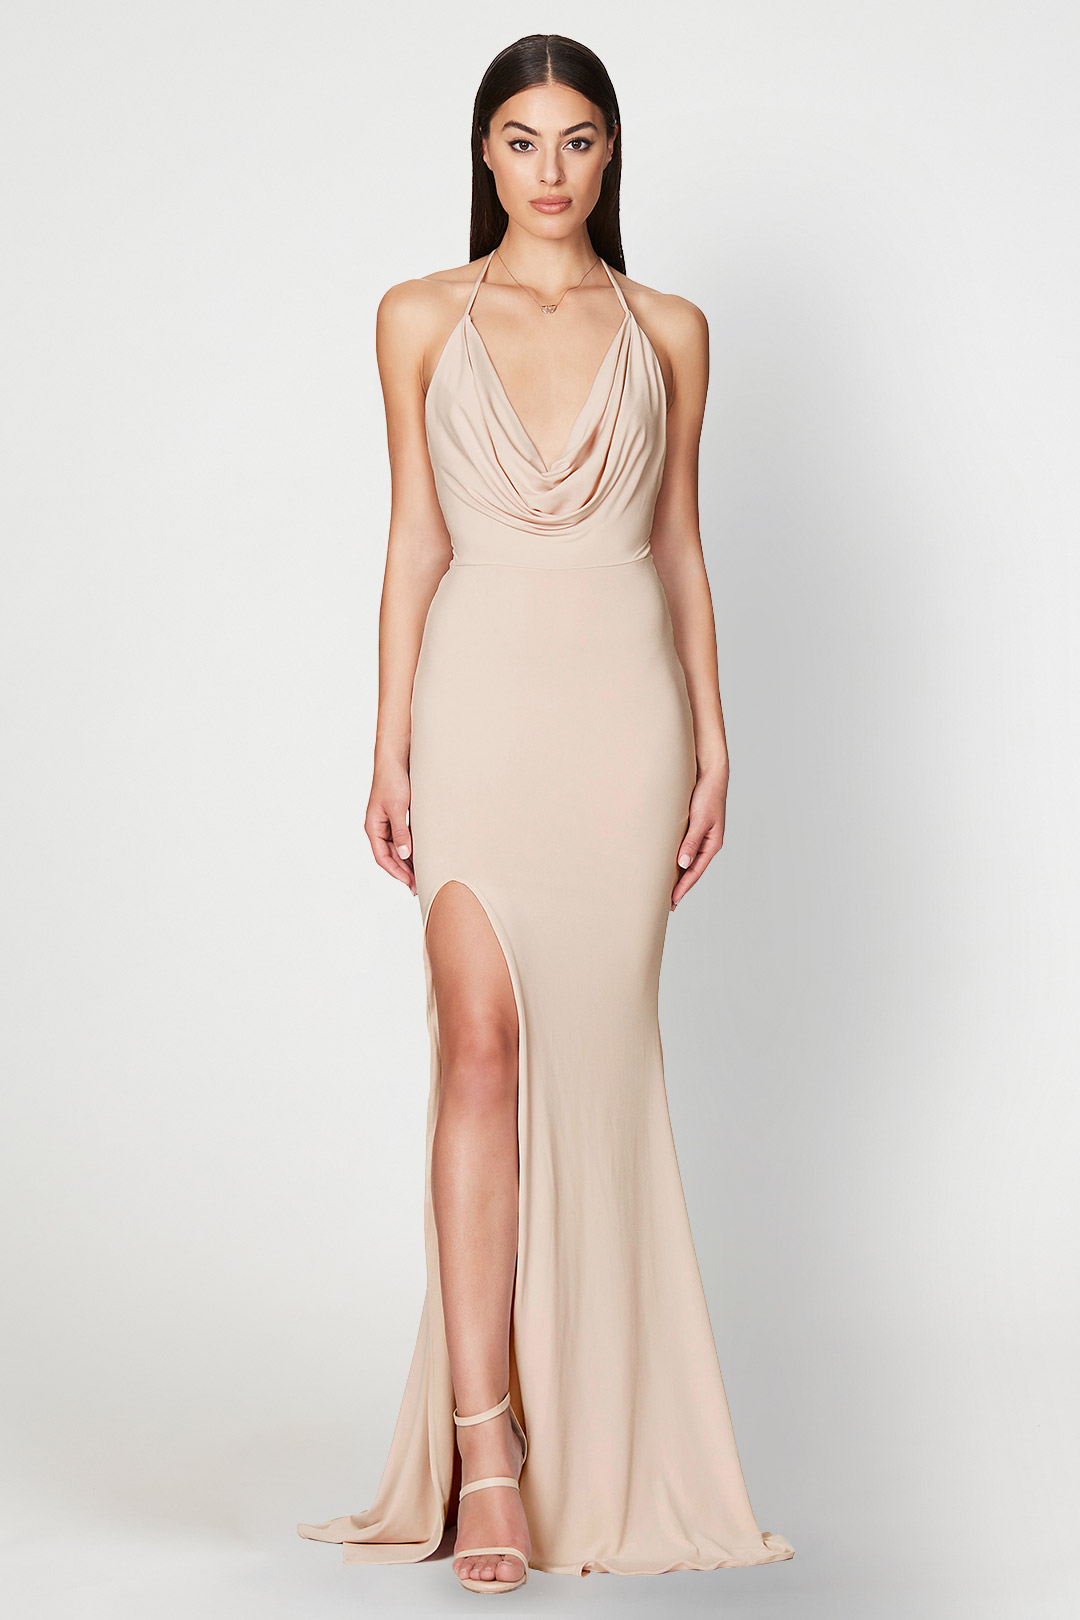 Rent A Dress Harley Nude Gown - Nookie Dress Rental